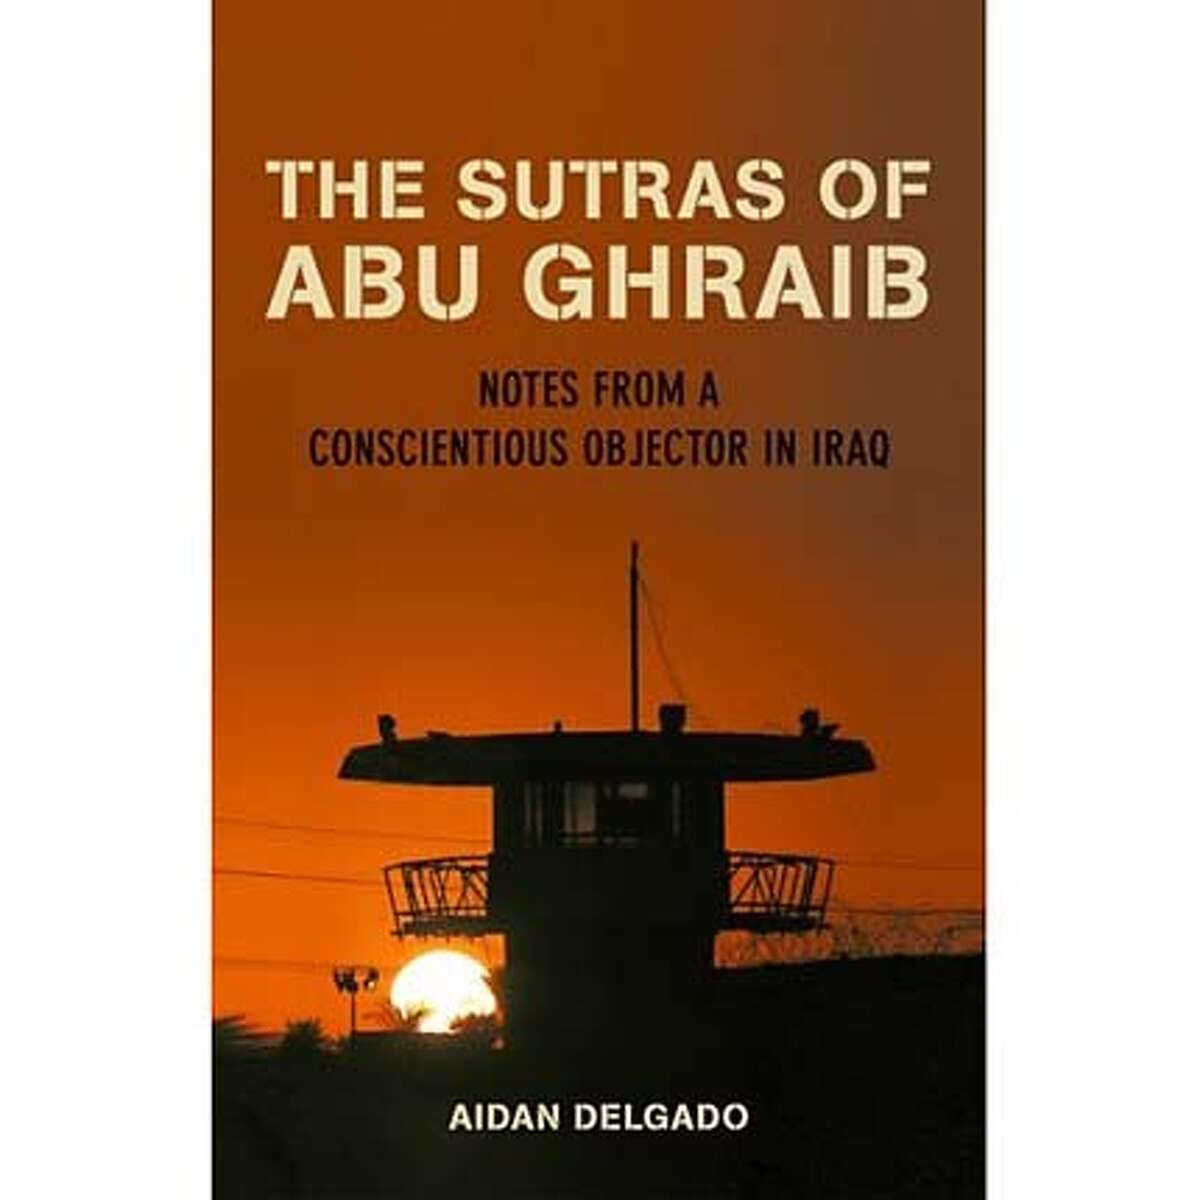 "The Sutras of Abu Ghraib: Notes From a Conscientious Objector in Iraq" by Aidan Delgado